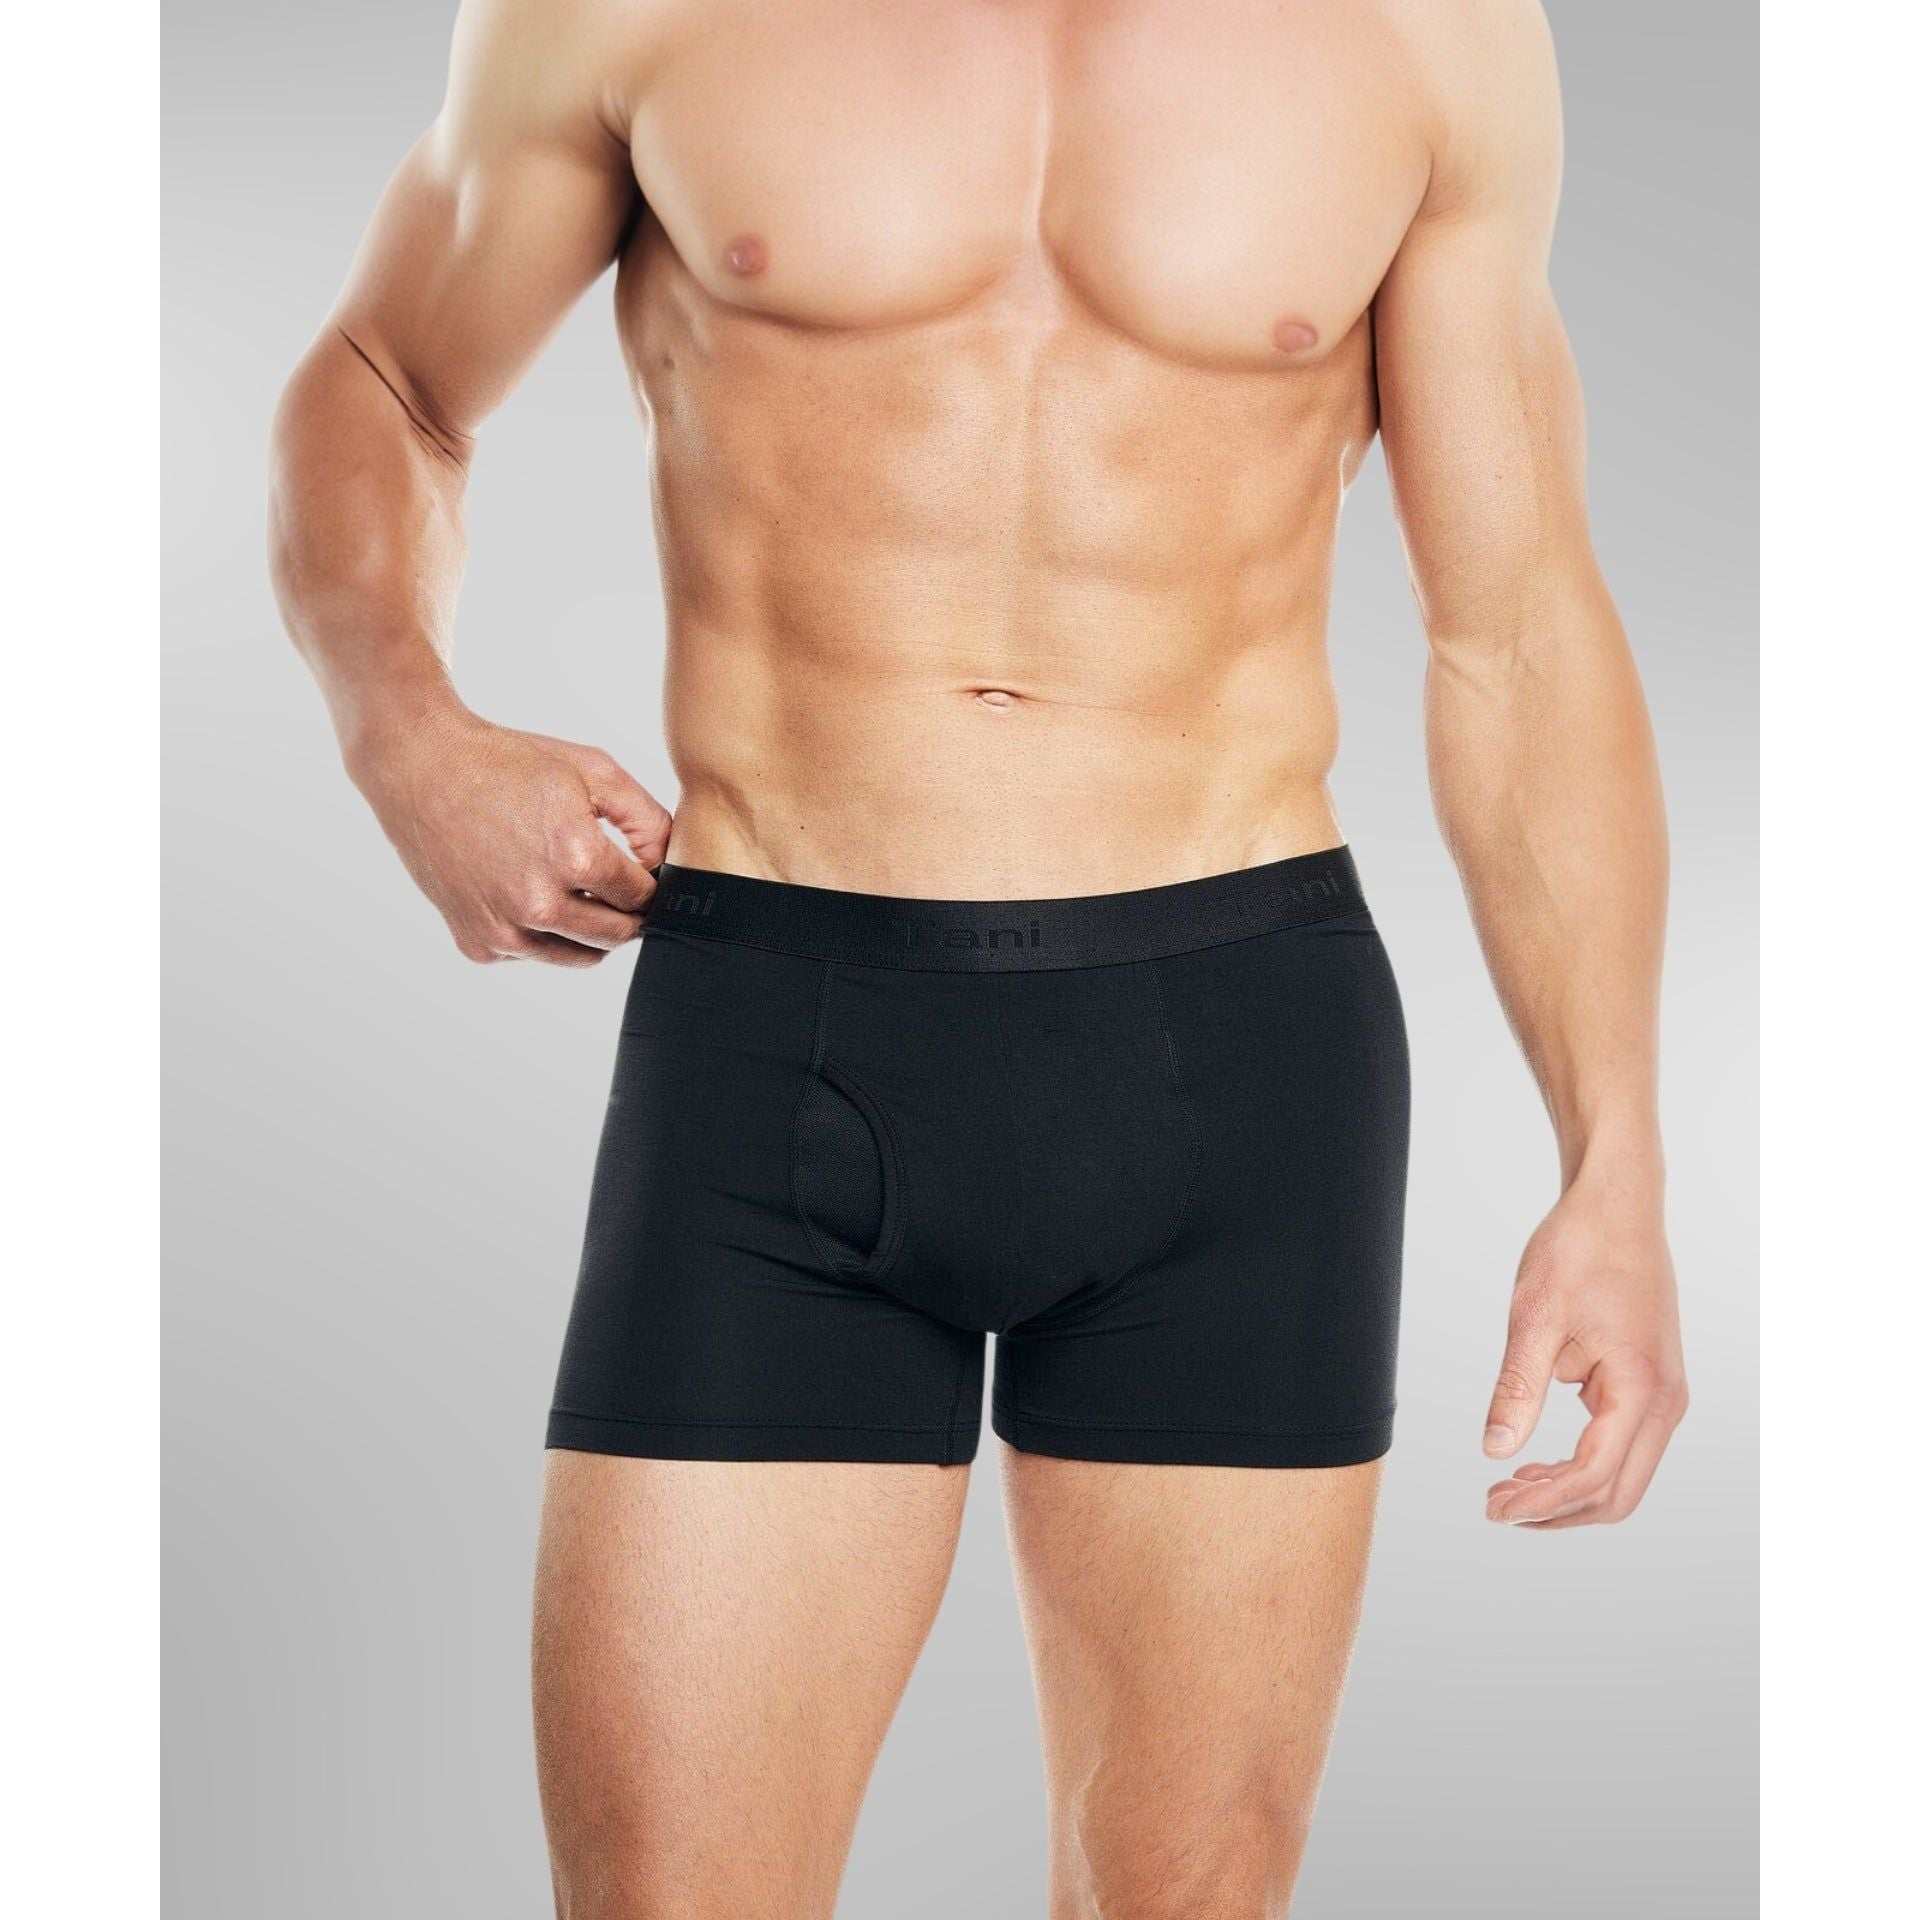 Man wearing Hybrid Pouch Fly Boxer Briefs